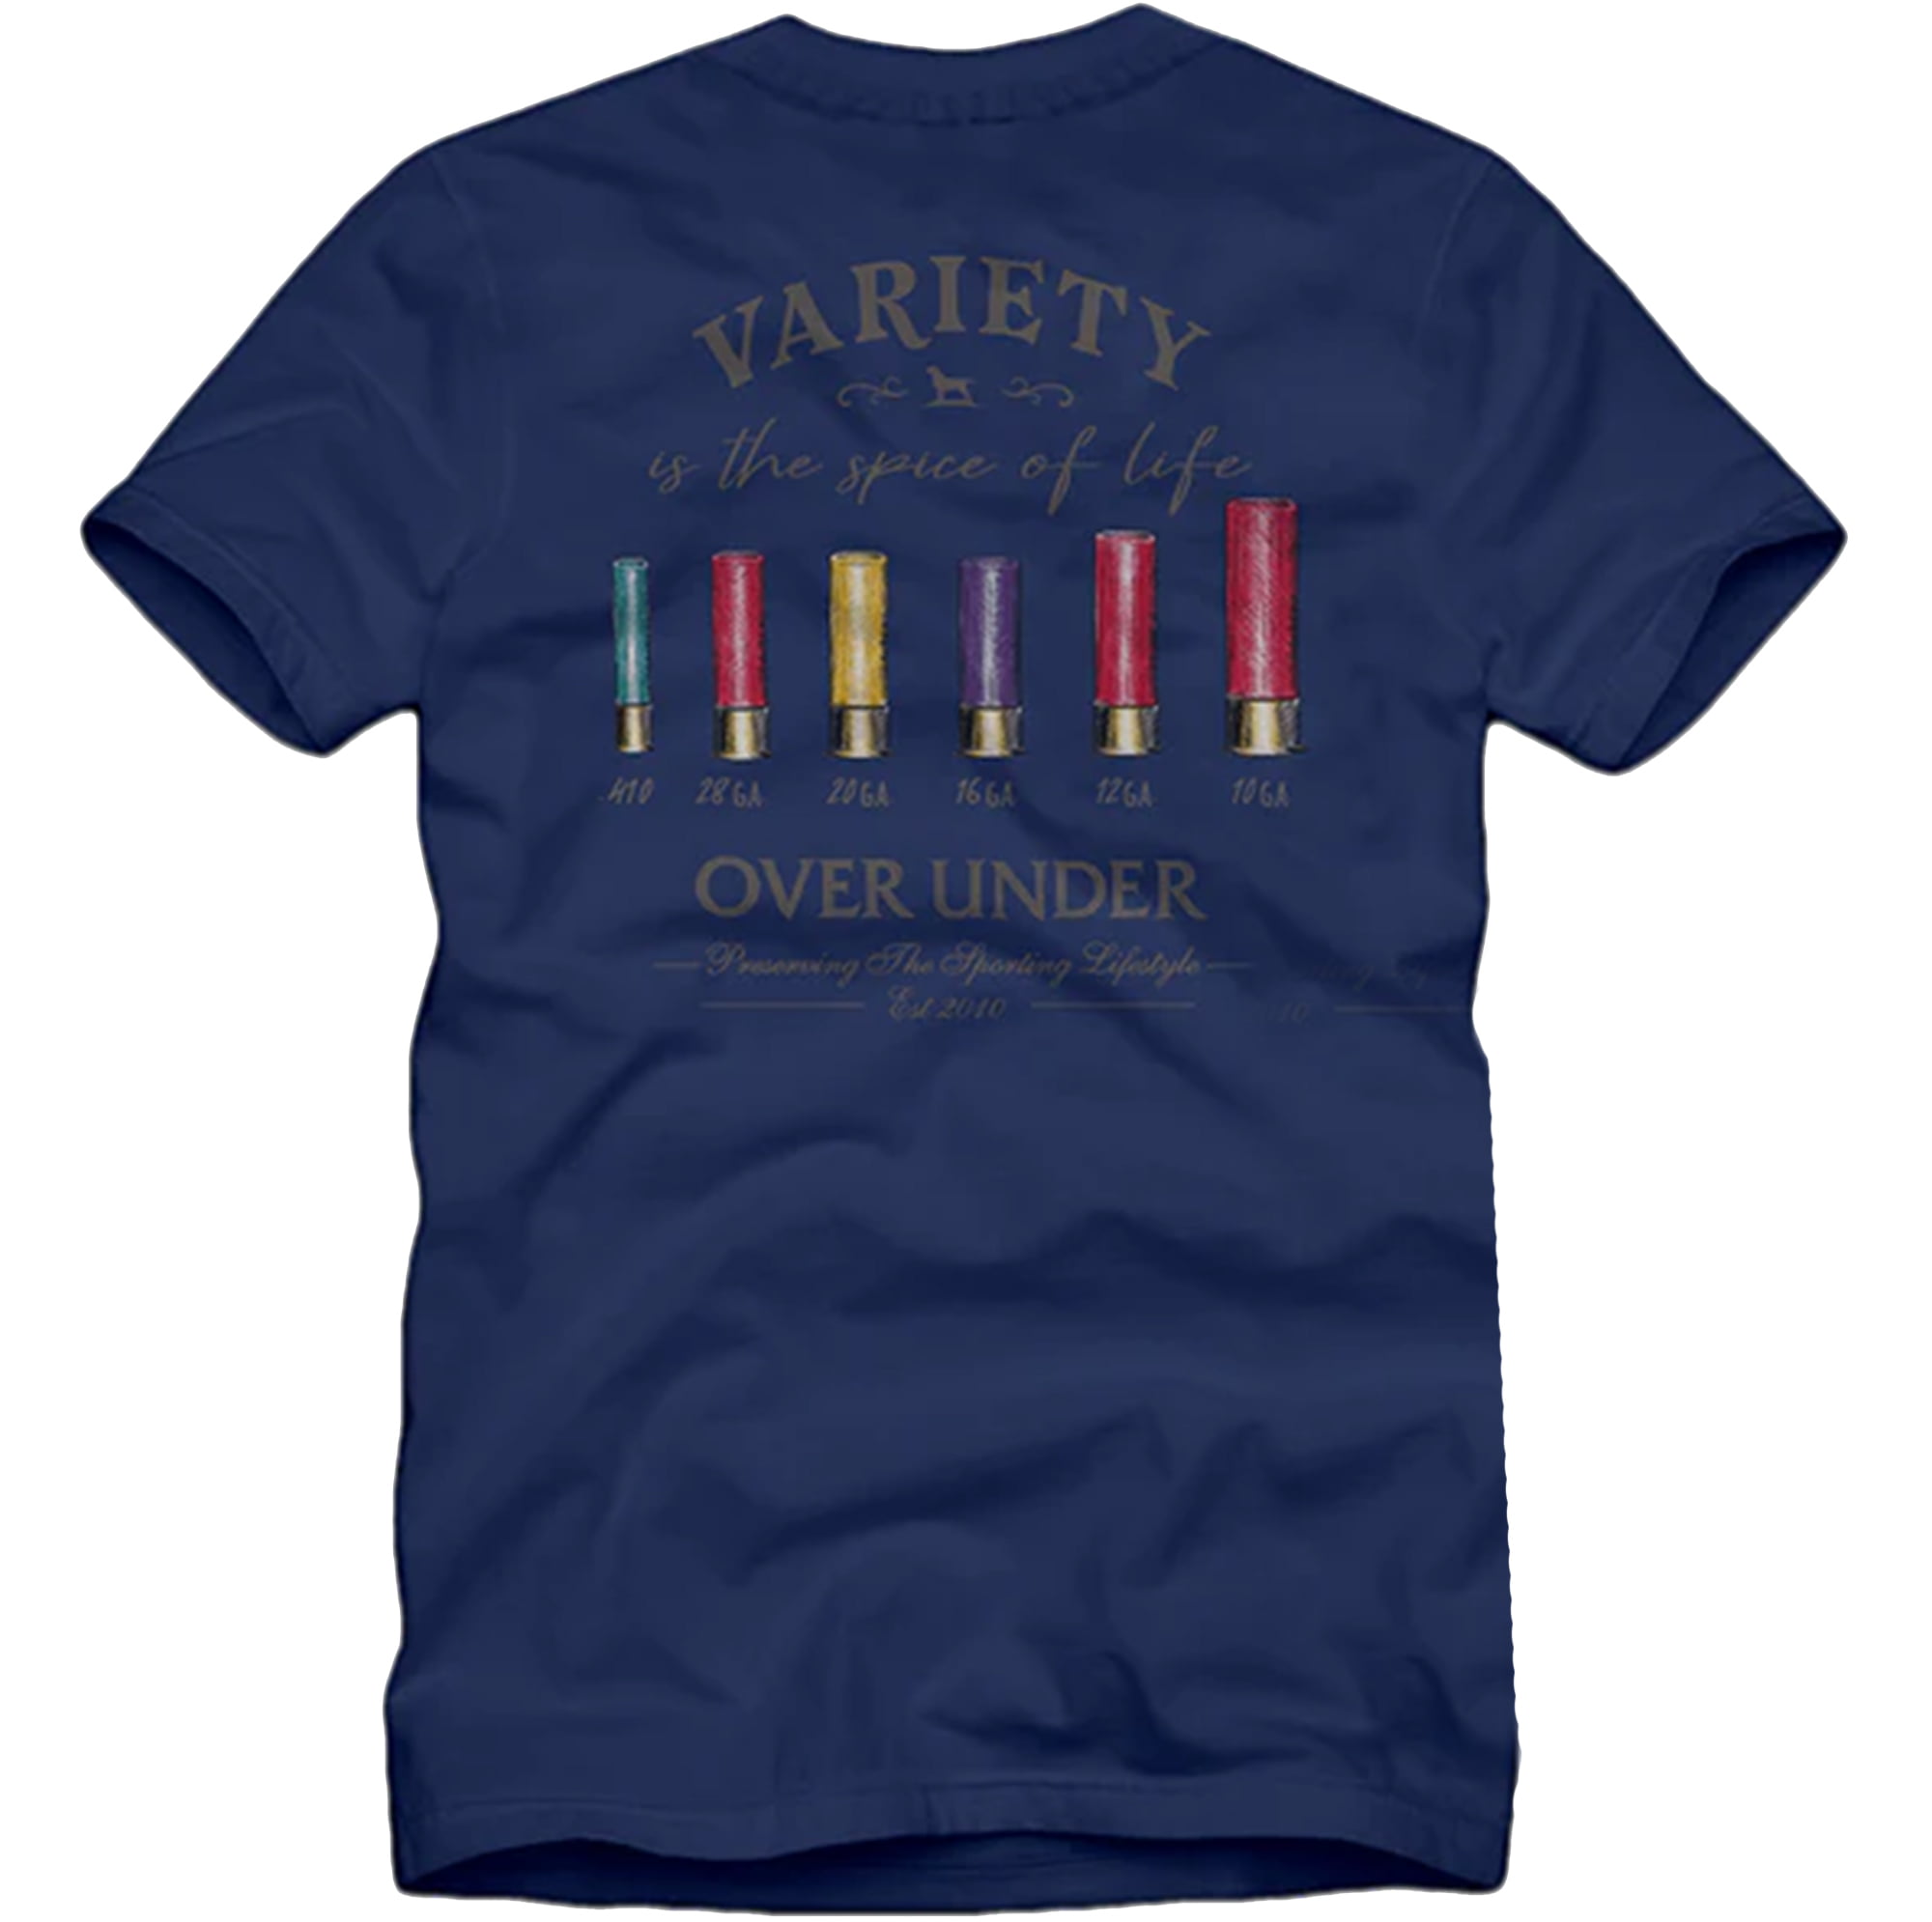 Over Under Clothing Variety is the Spice of Life Adult Unisex Short Sleeve  T-Shirt, Navy- X-Large 